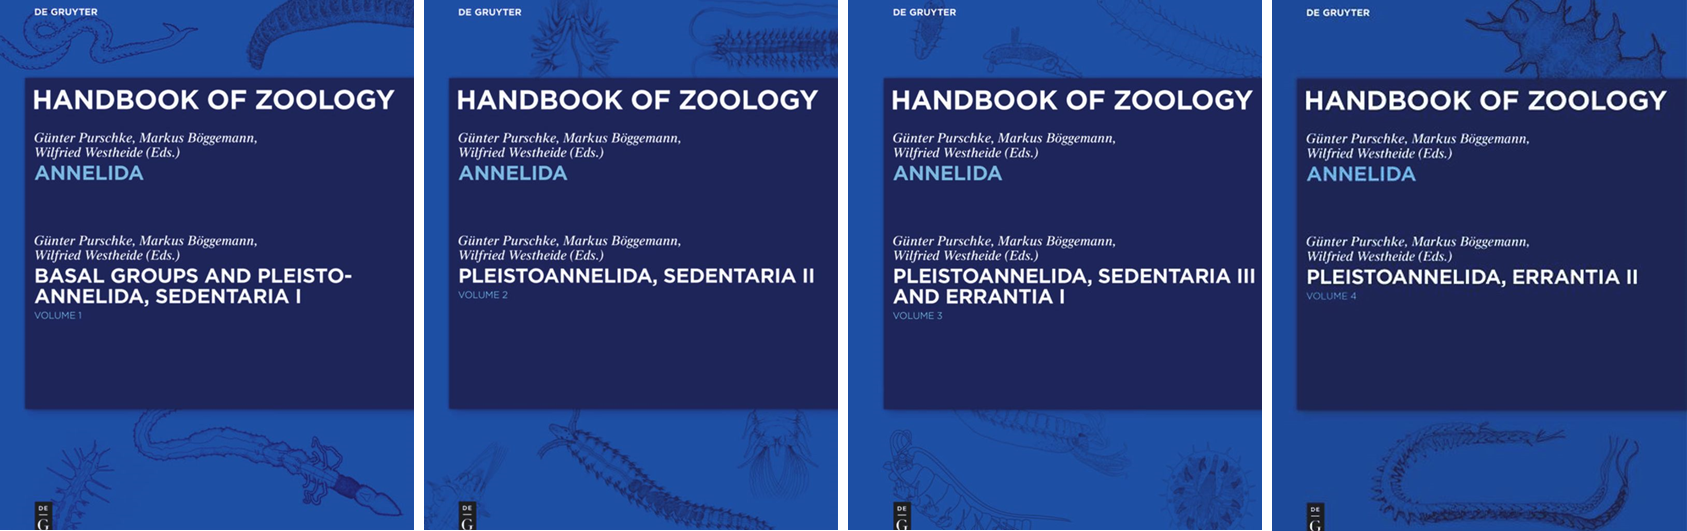 Handbook of Zoology, Annelida, Volume 1-4, Cover pages